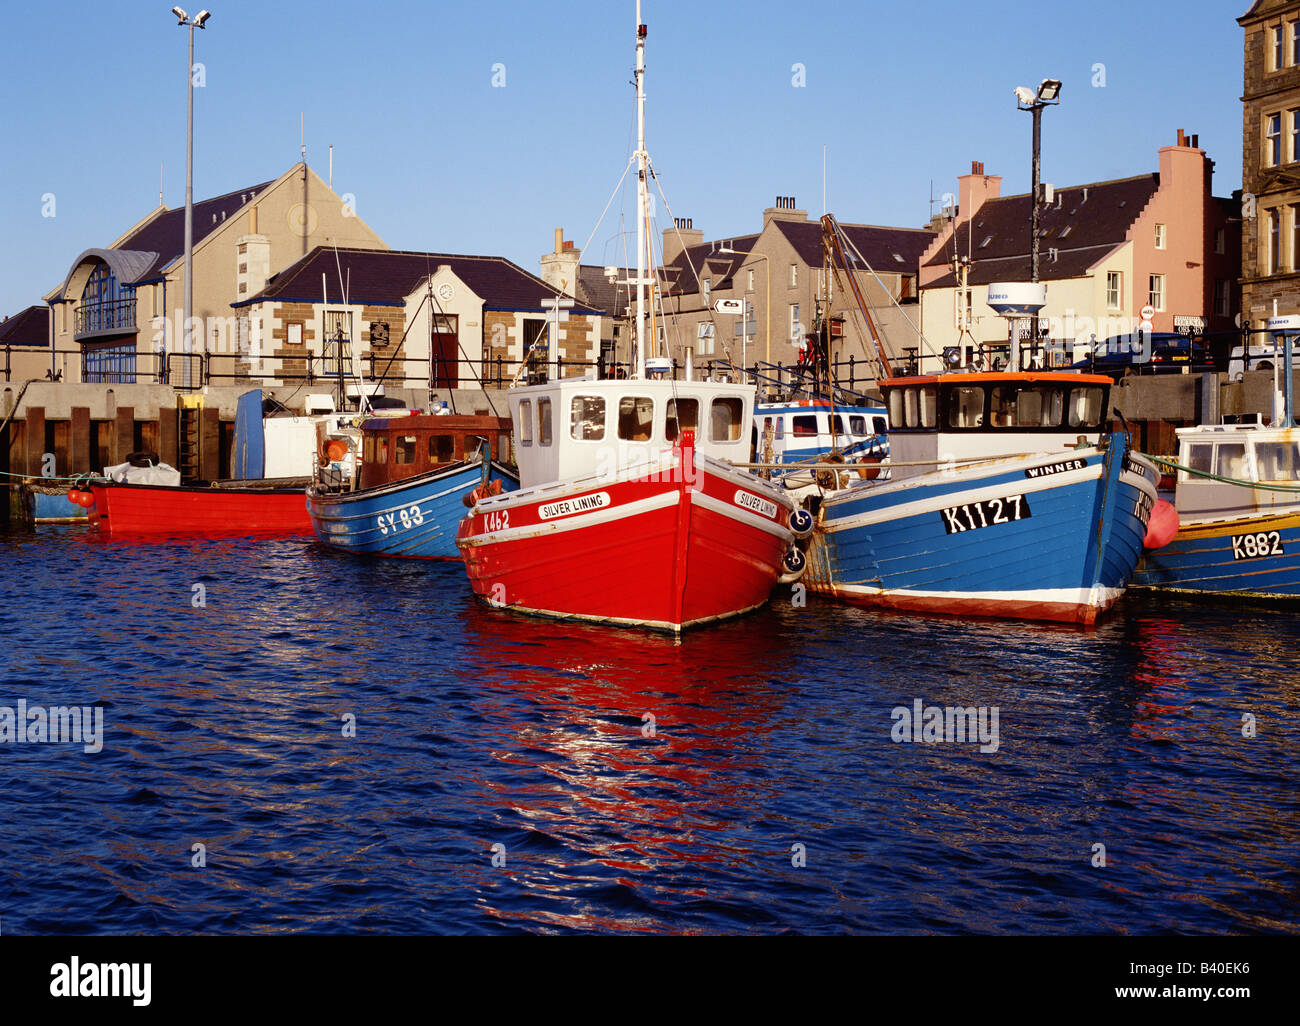 dh Fishing boats Harbour KIRKWALL ORKNEY Scottish Waterfront quayside fishingboats moored red boat islands Stock Photo